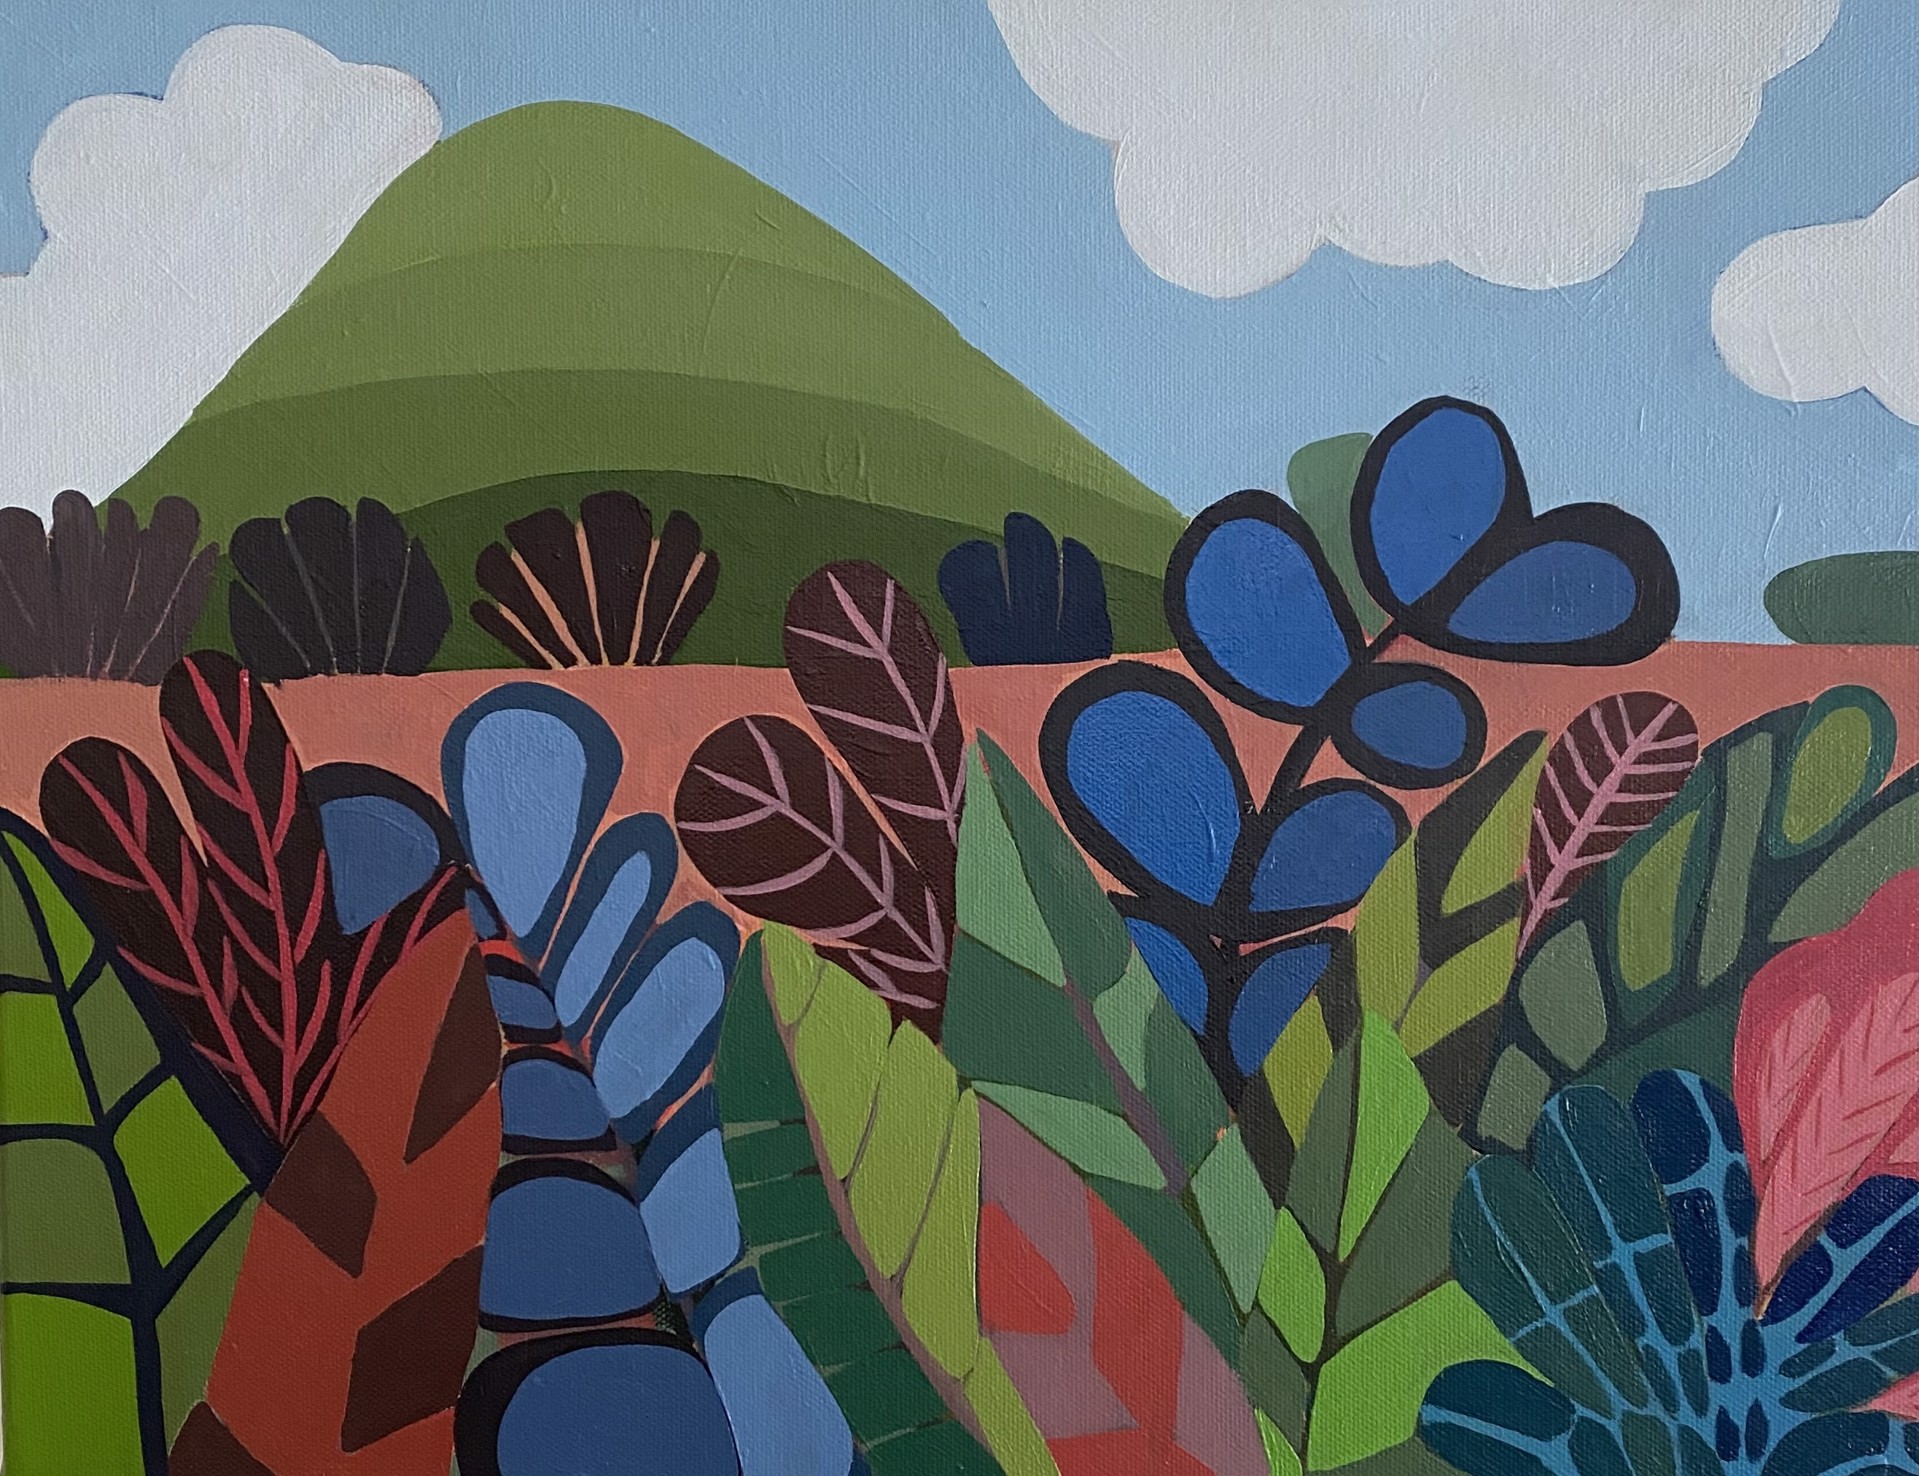 Green Hill with Leaves and Blooming Blue Plants by Sage Tucker-Ketcham